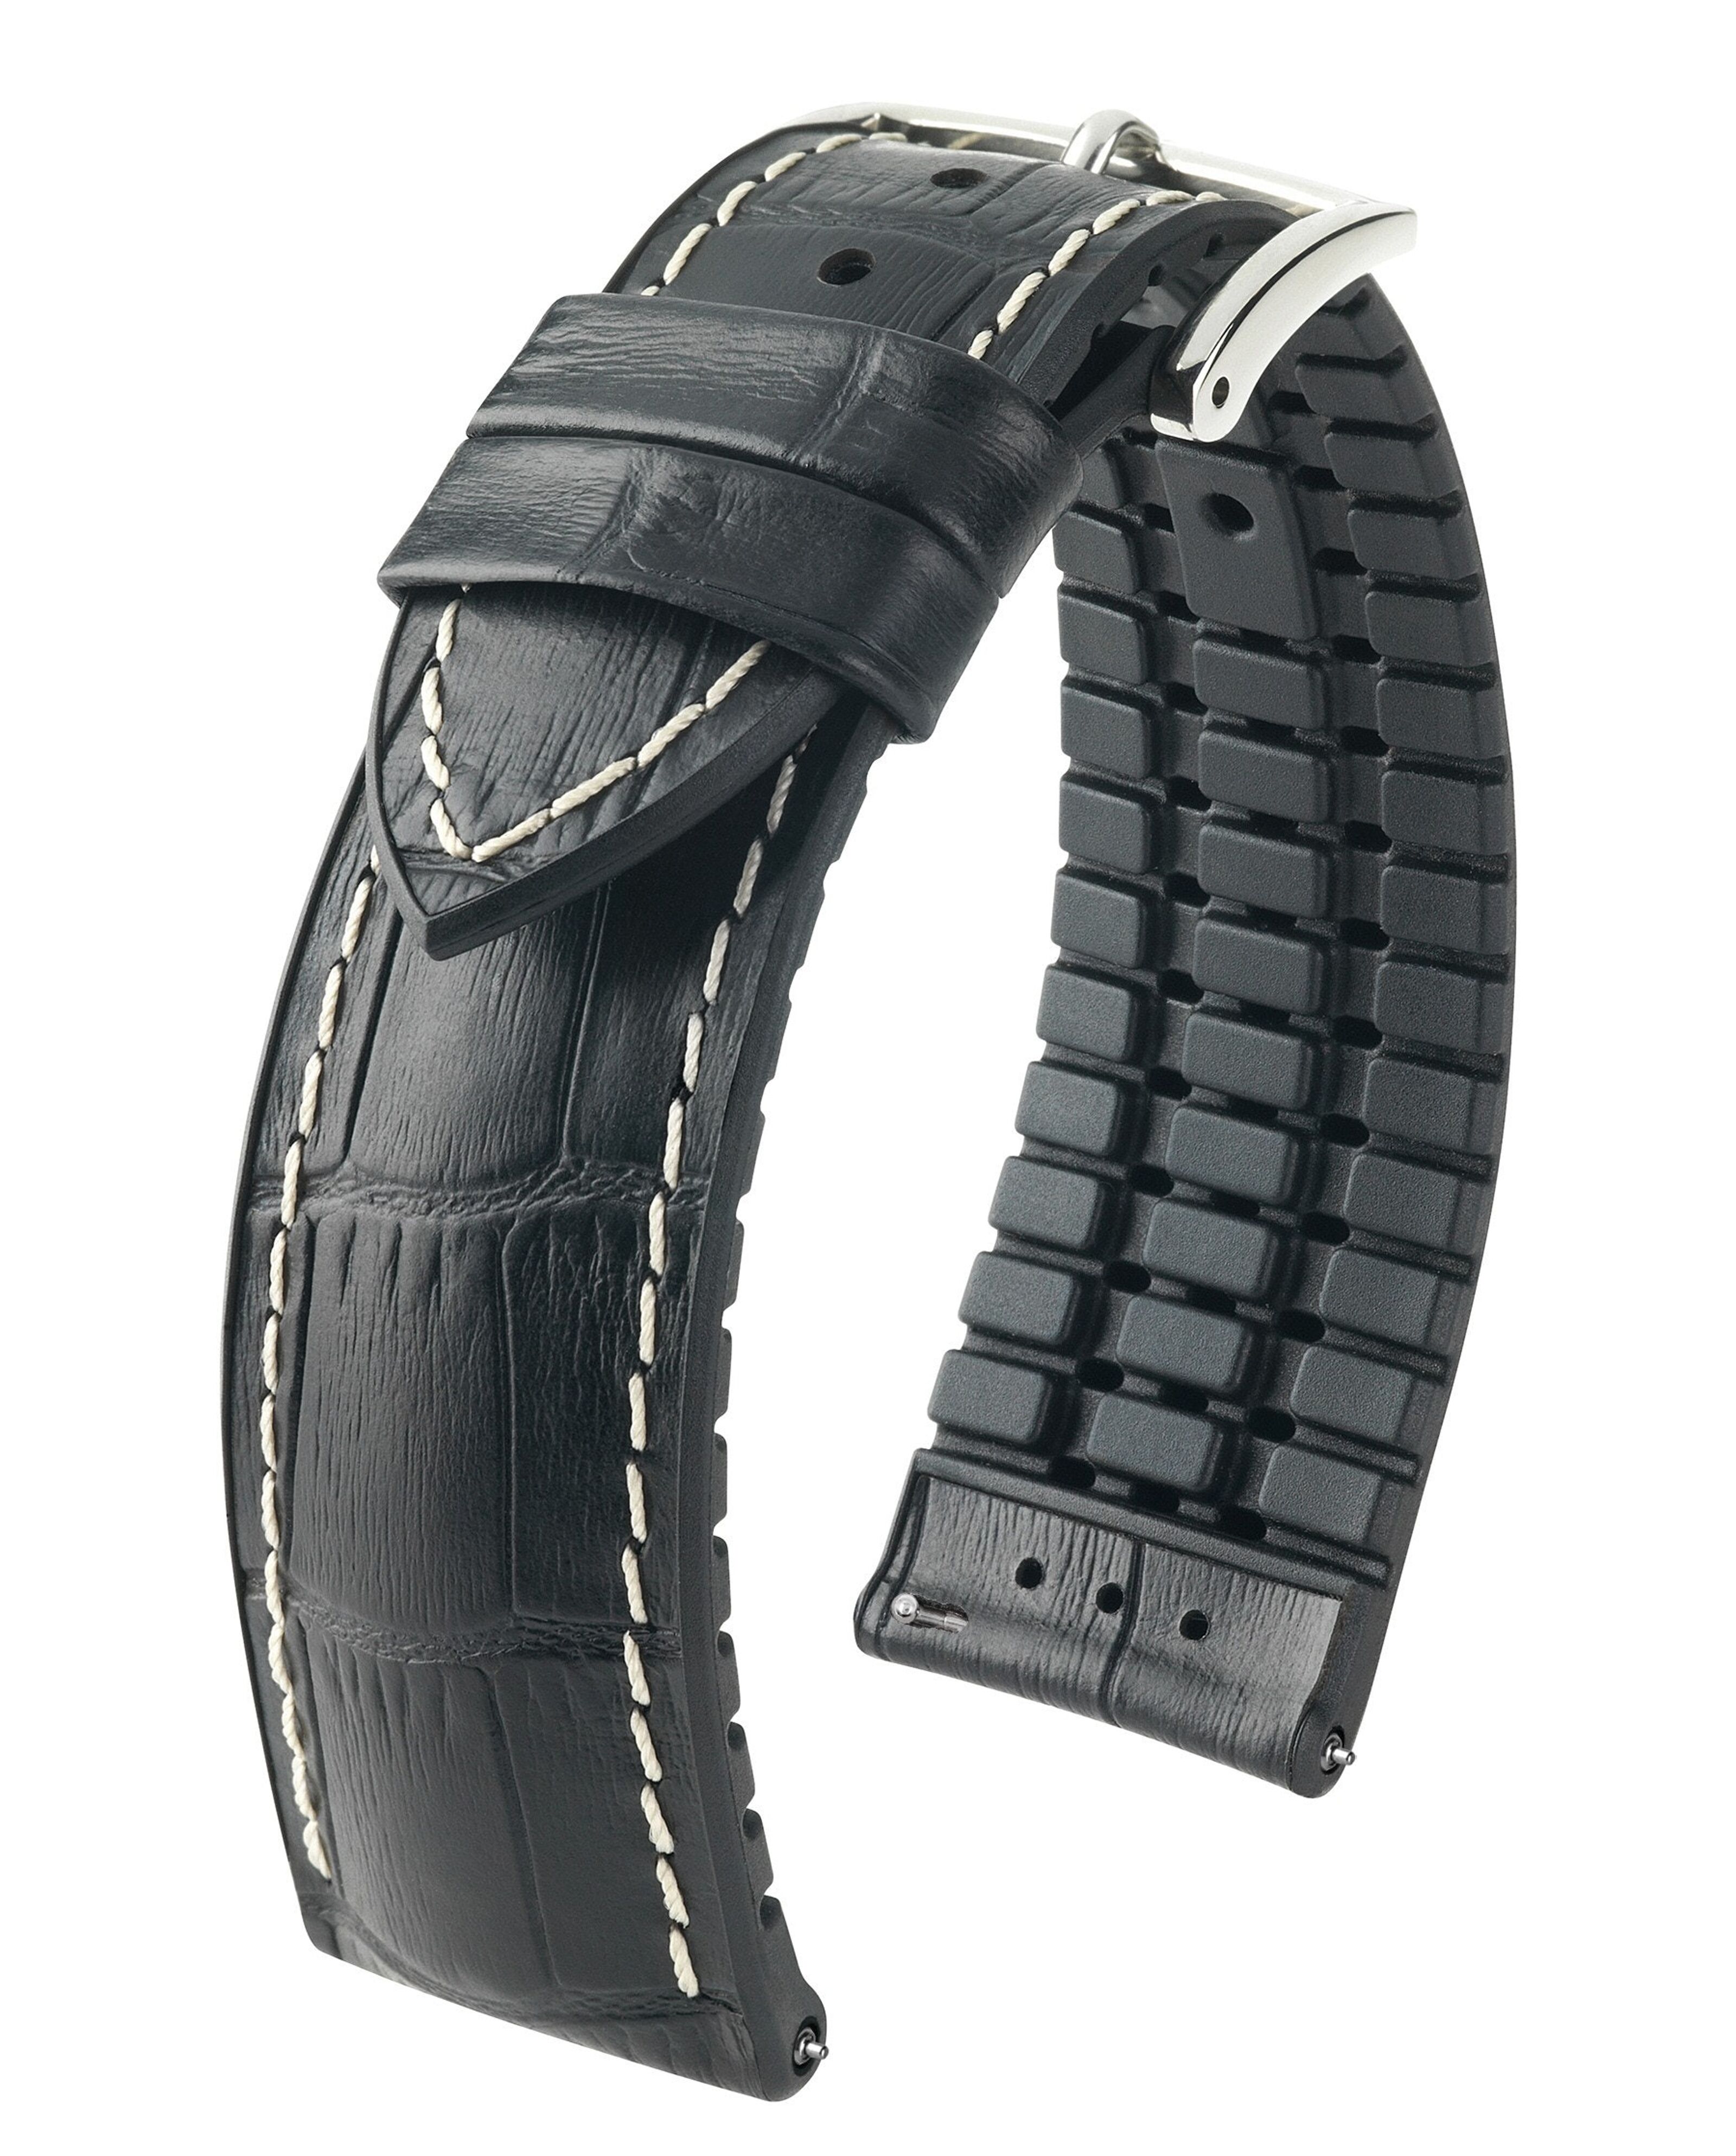 wholesale of - watch L Italian and black with the HIRSCH Buy George women & available - strap rubber men attachment - 22mm 24mm 20mm, - in - alligator widths calfskin sporty for - embossing core